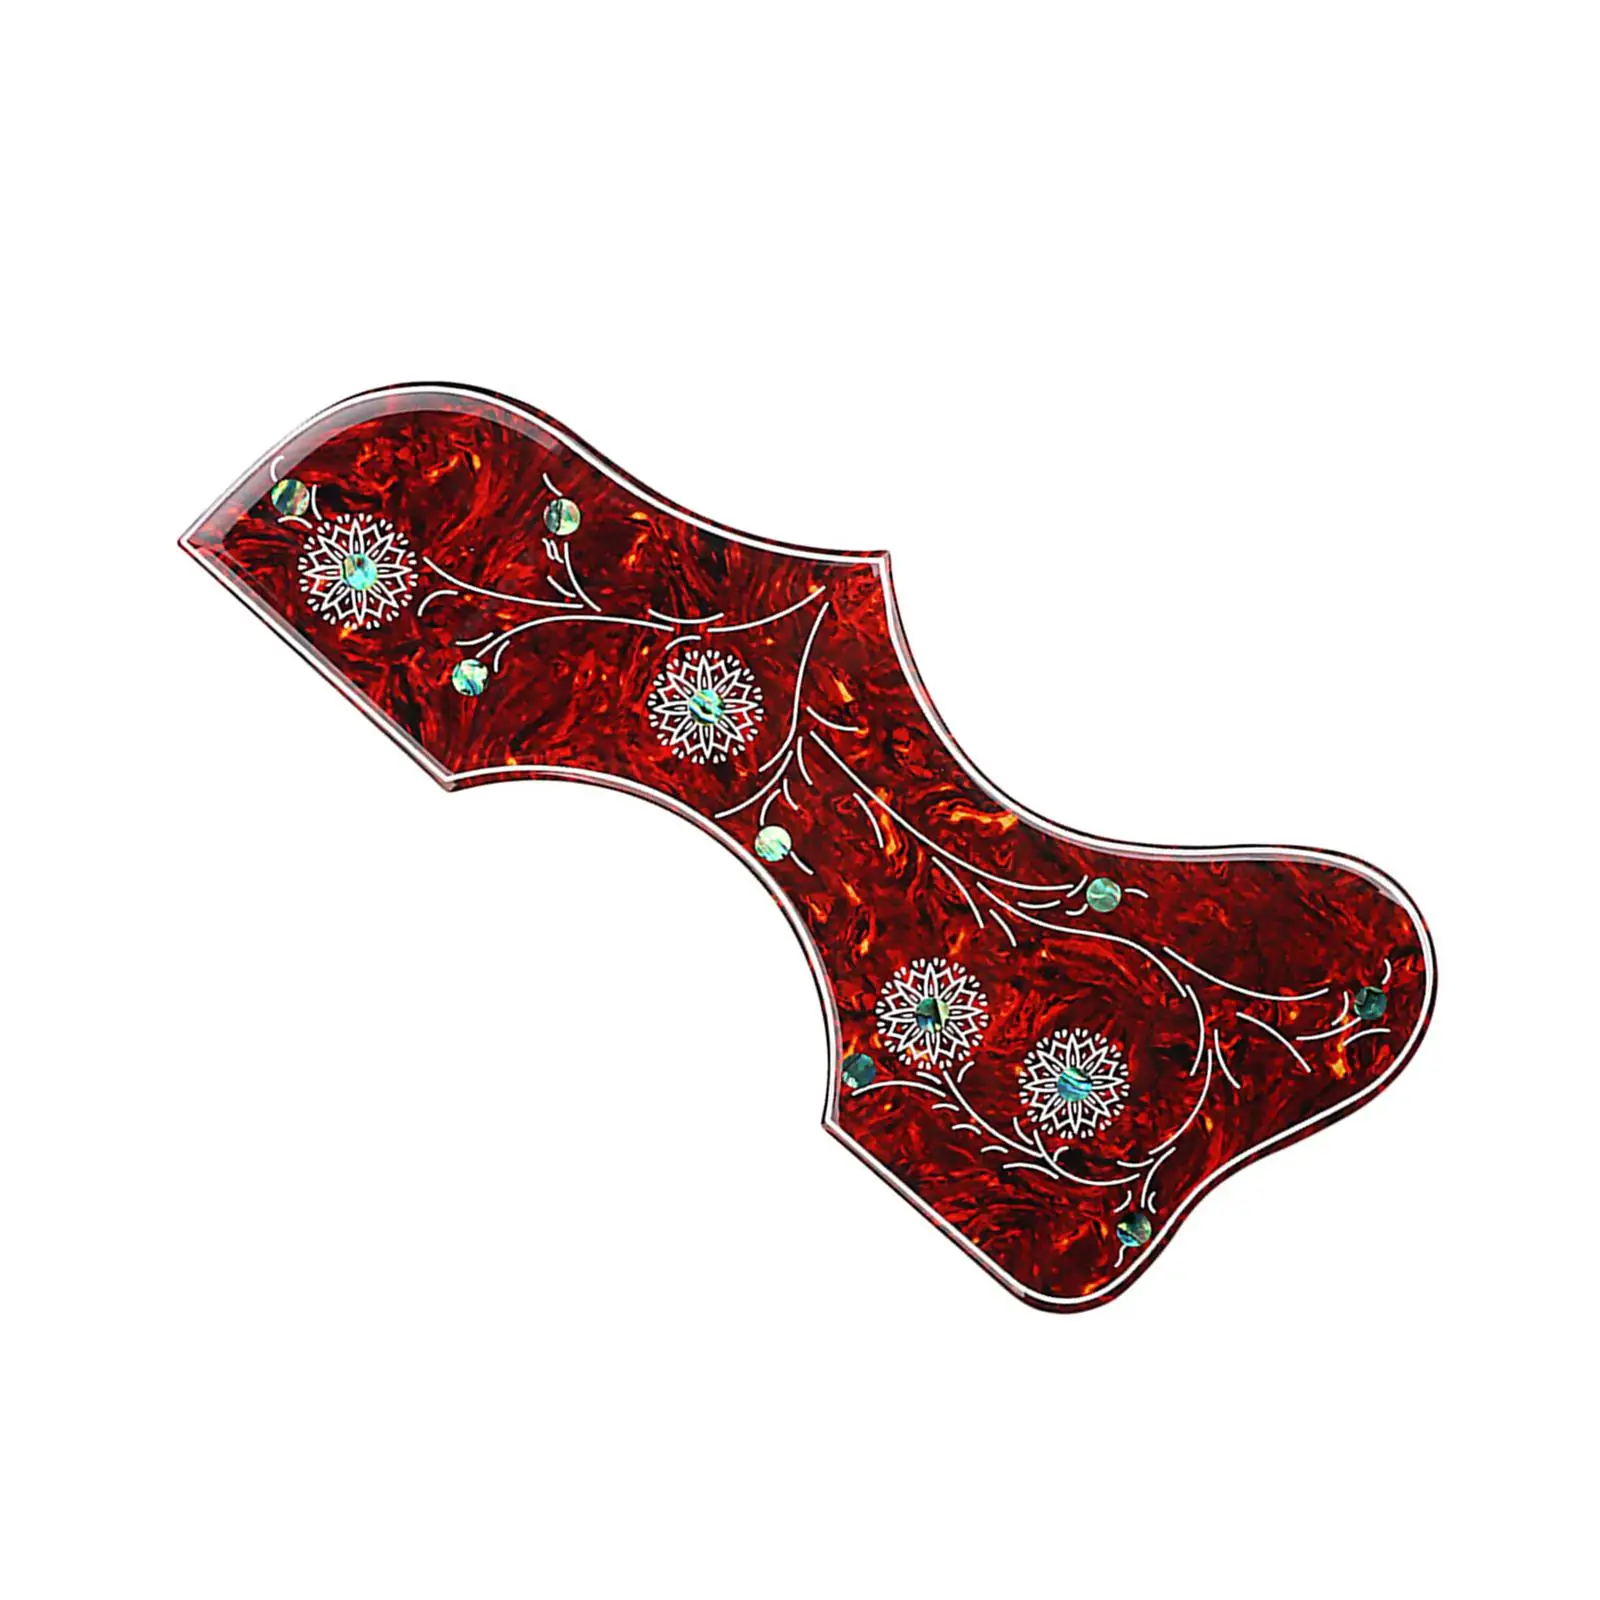 

Acoustic Guitar Pickguard Accessory DIY Vintage Musical Instrument Self Sticky Backing Floral Shaped for Acoustic Guitar